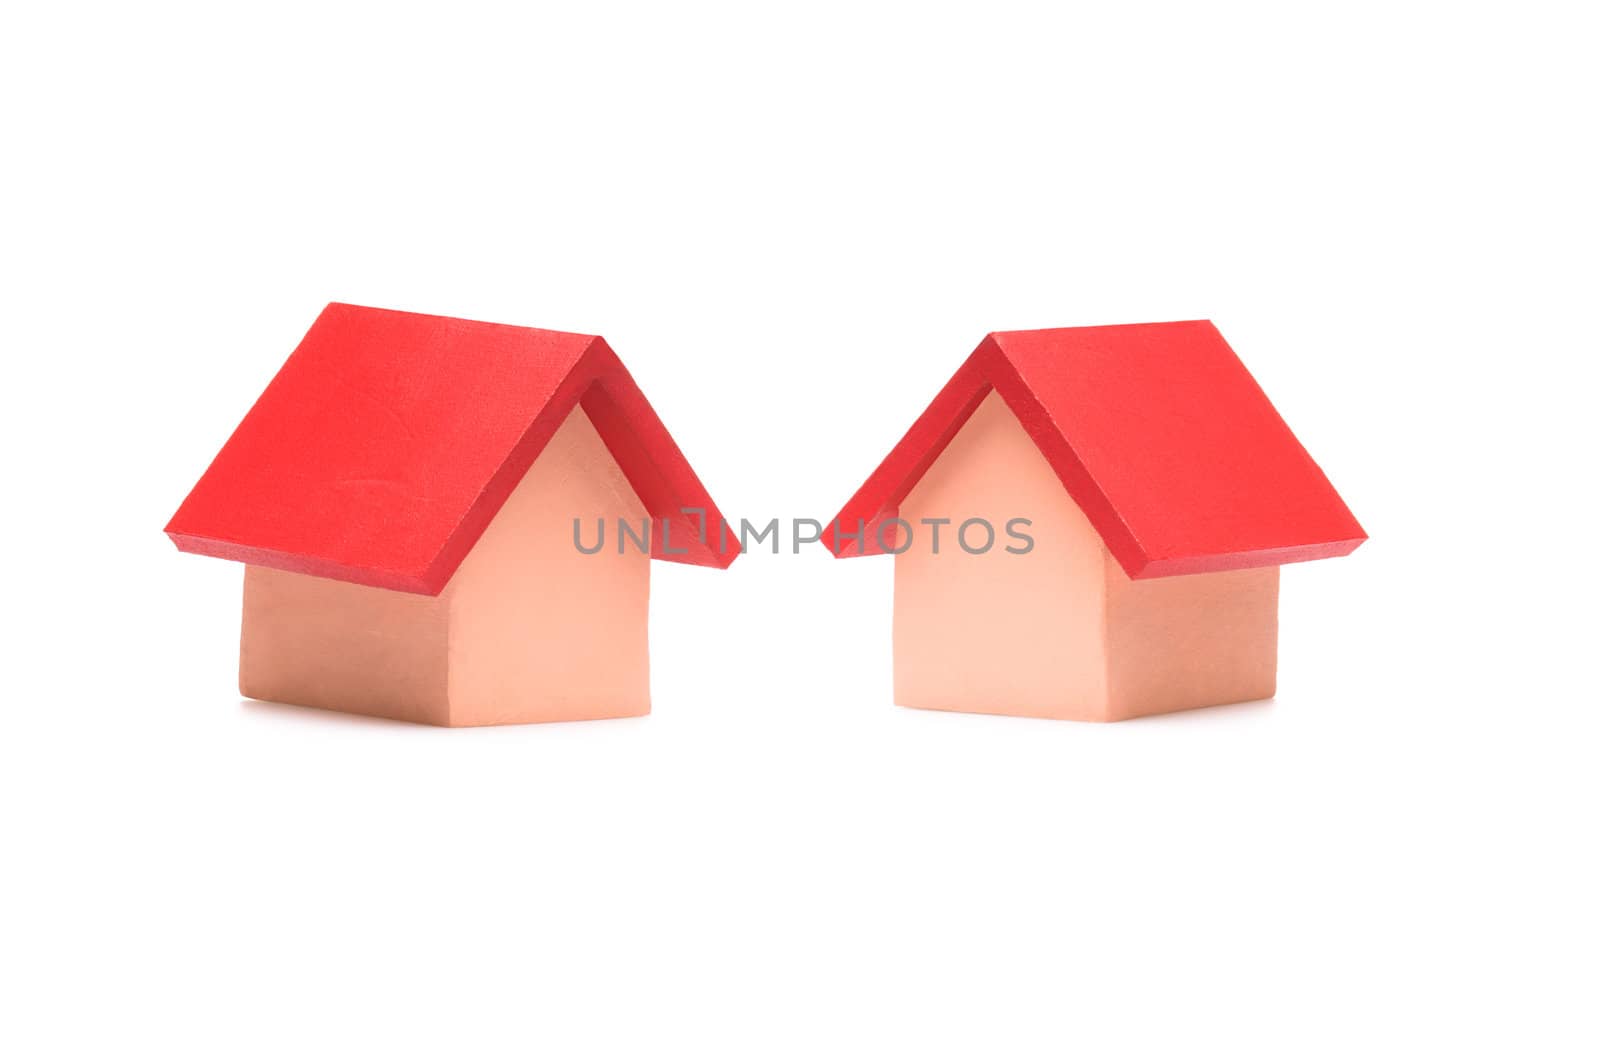 Small red roofed model house over white